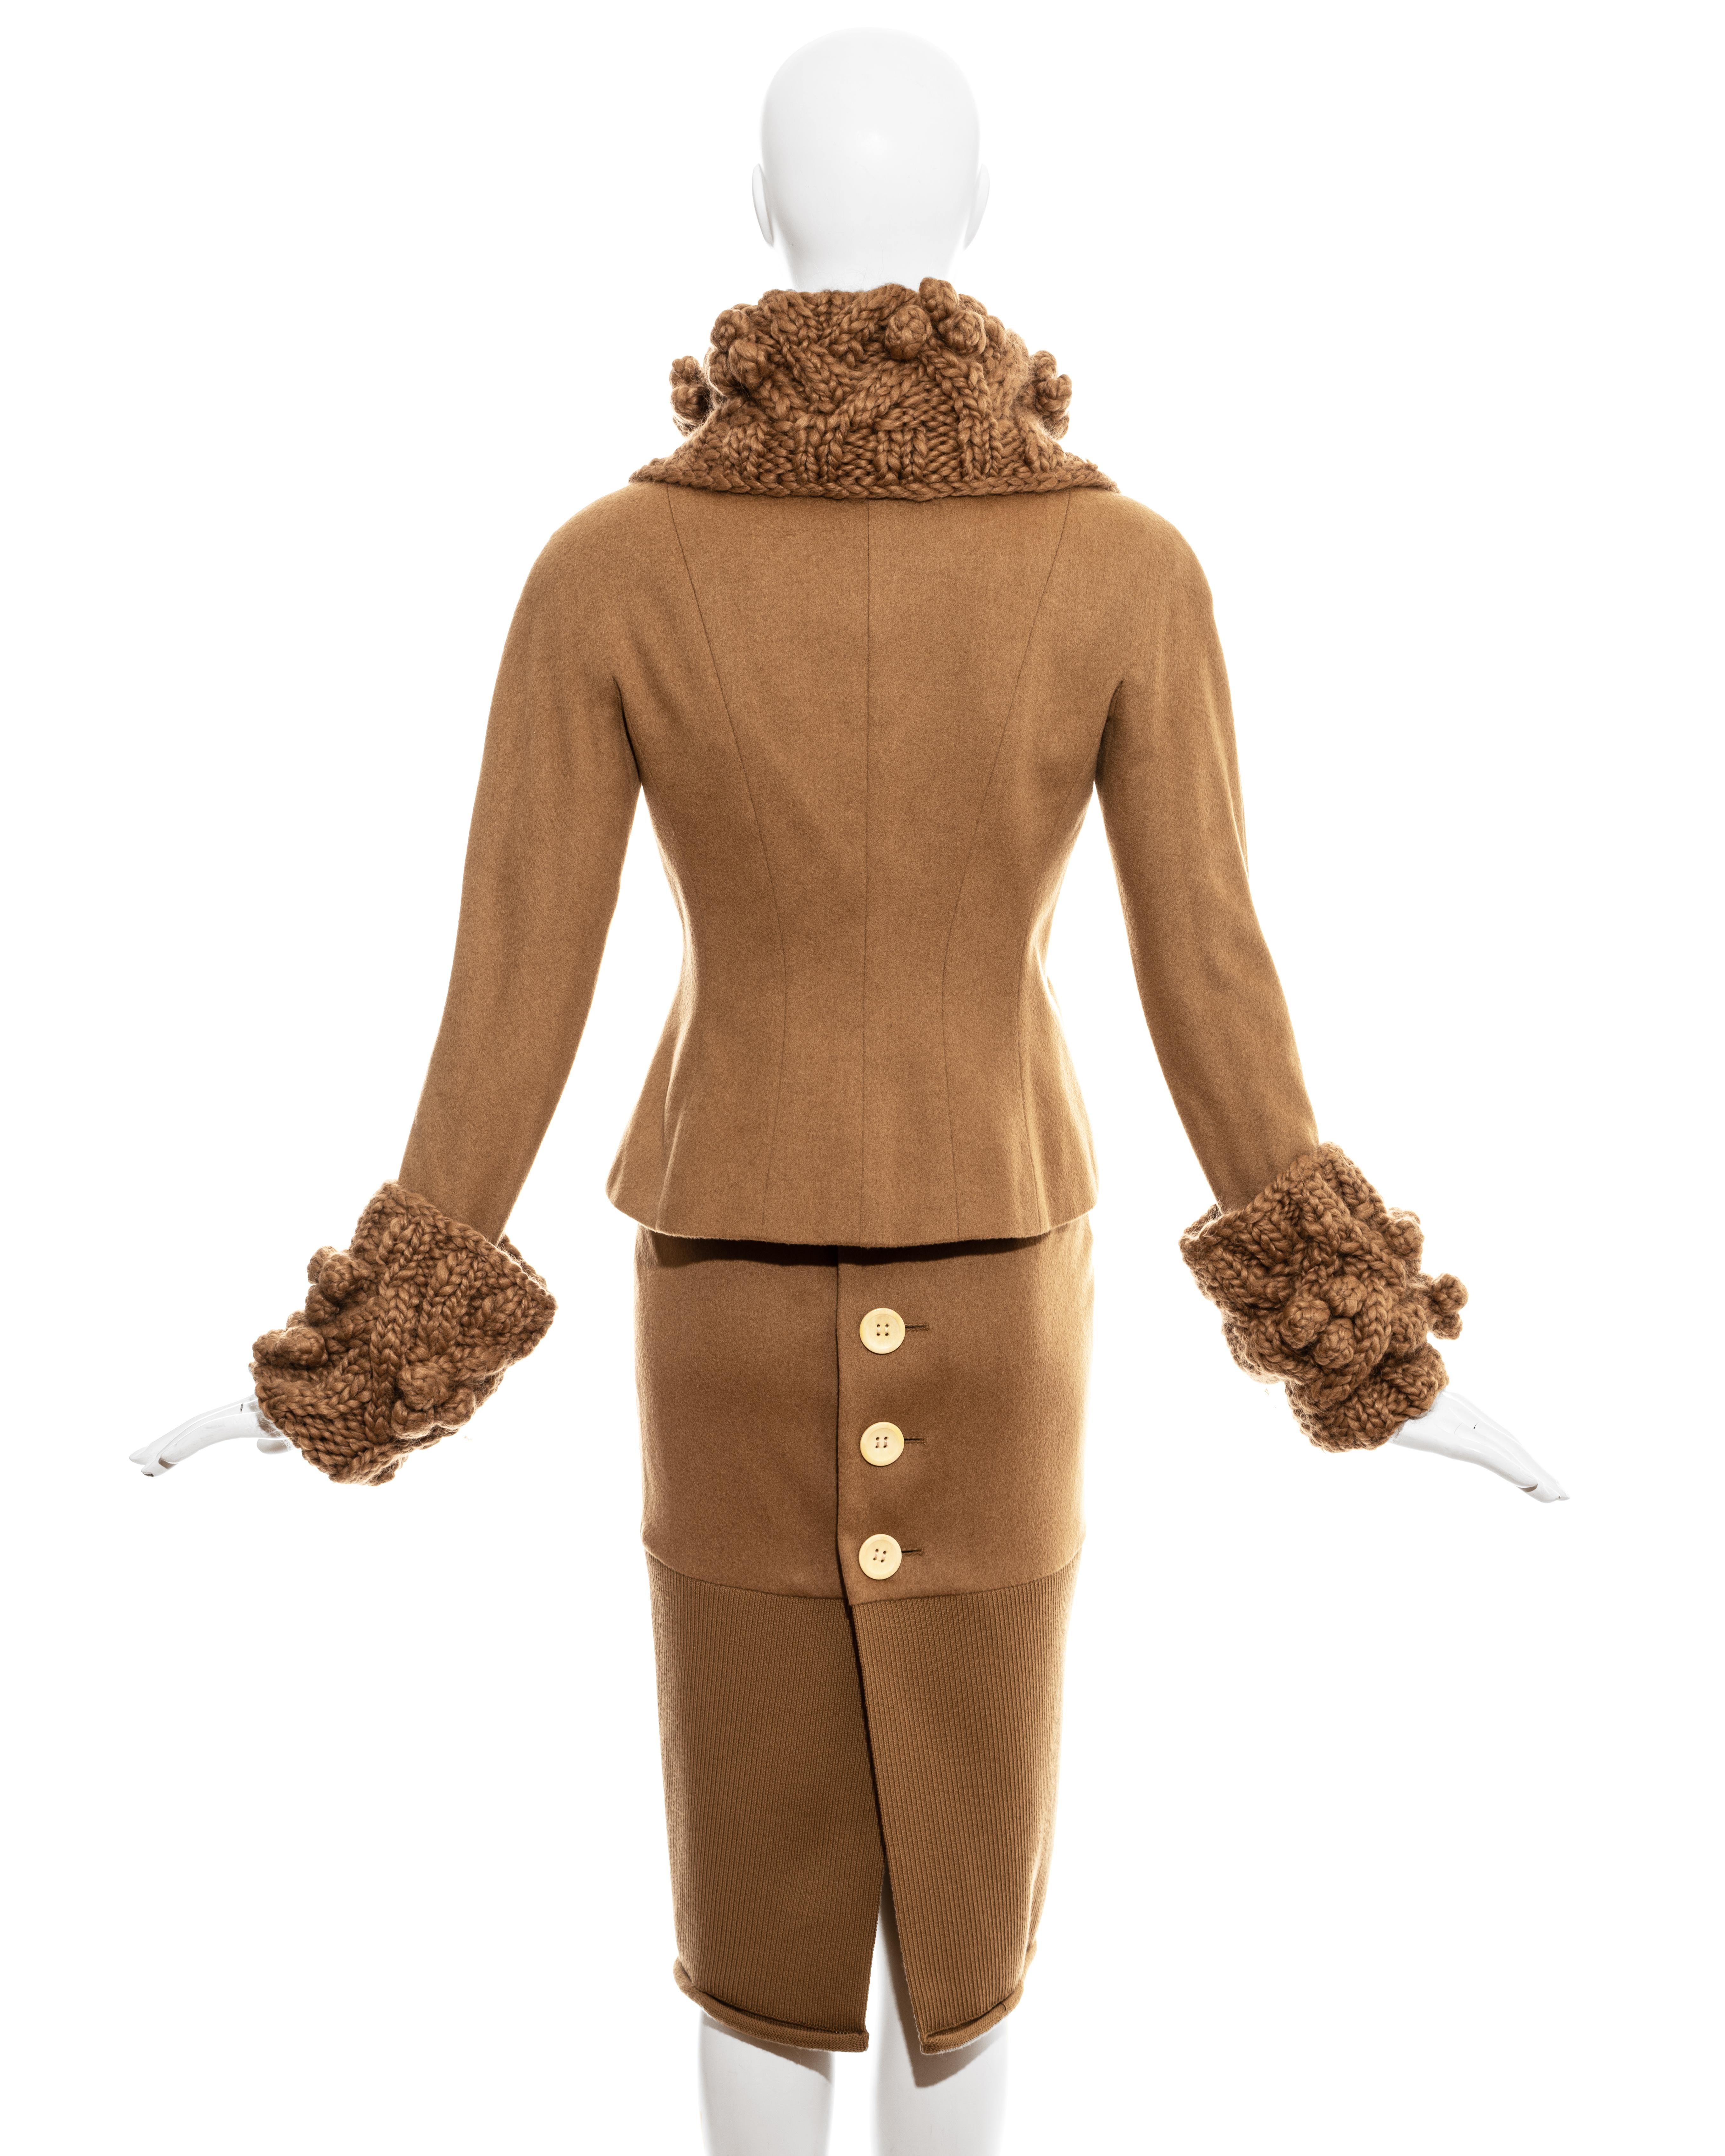 Christian Dior by John Galliano camel wool skirt suit, fw 1999 For Sale 1